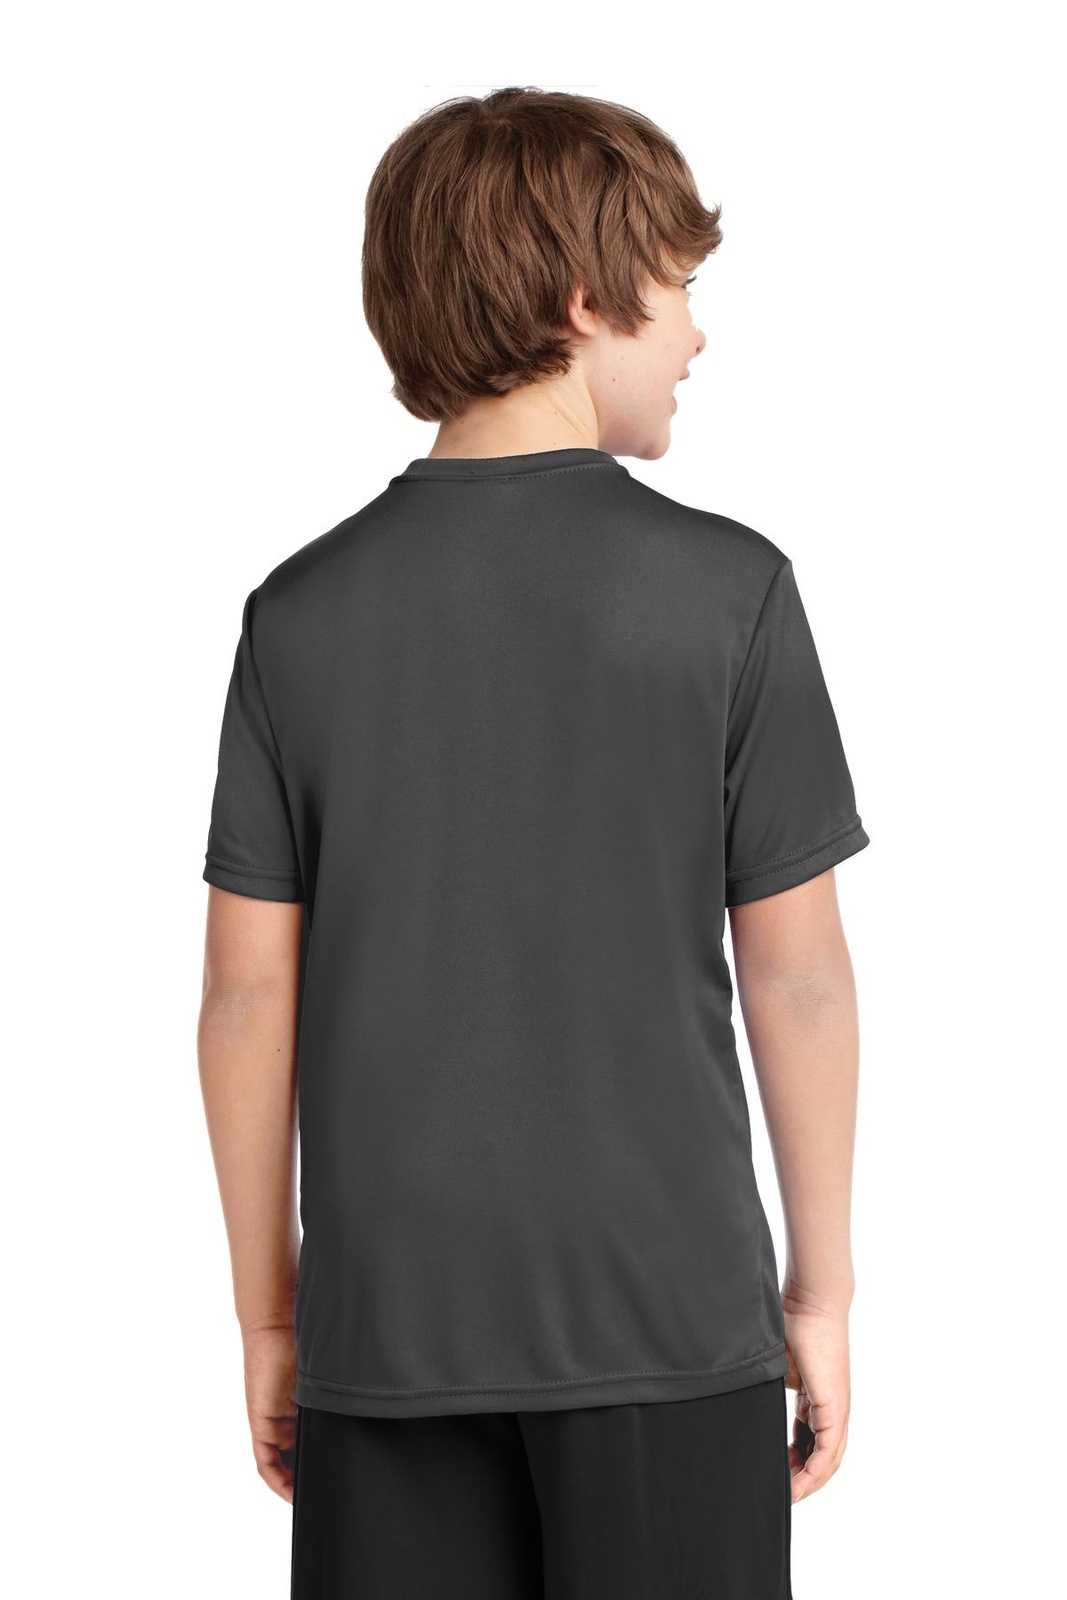 Port & Company PC380Y Youth Performance Tee - Charcoal - HIT a Double - 1